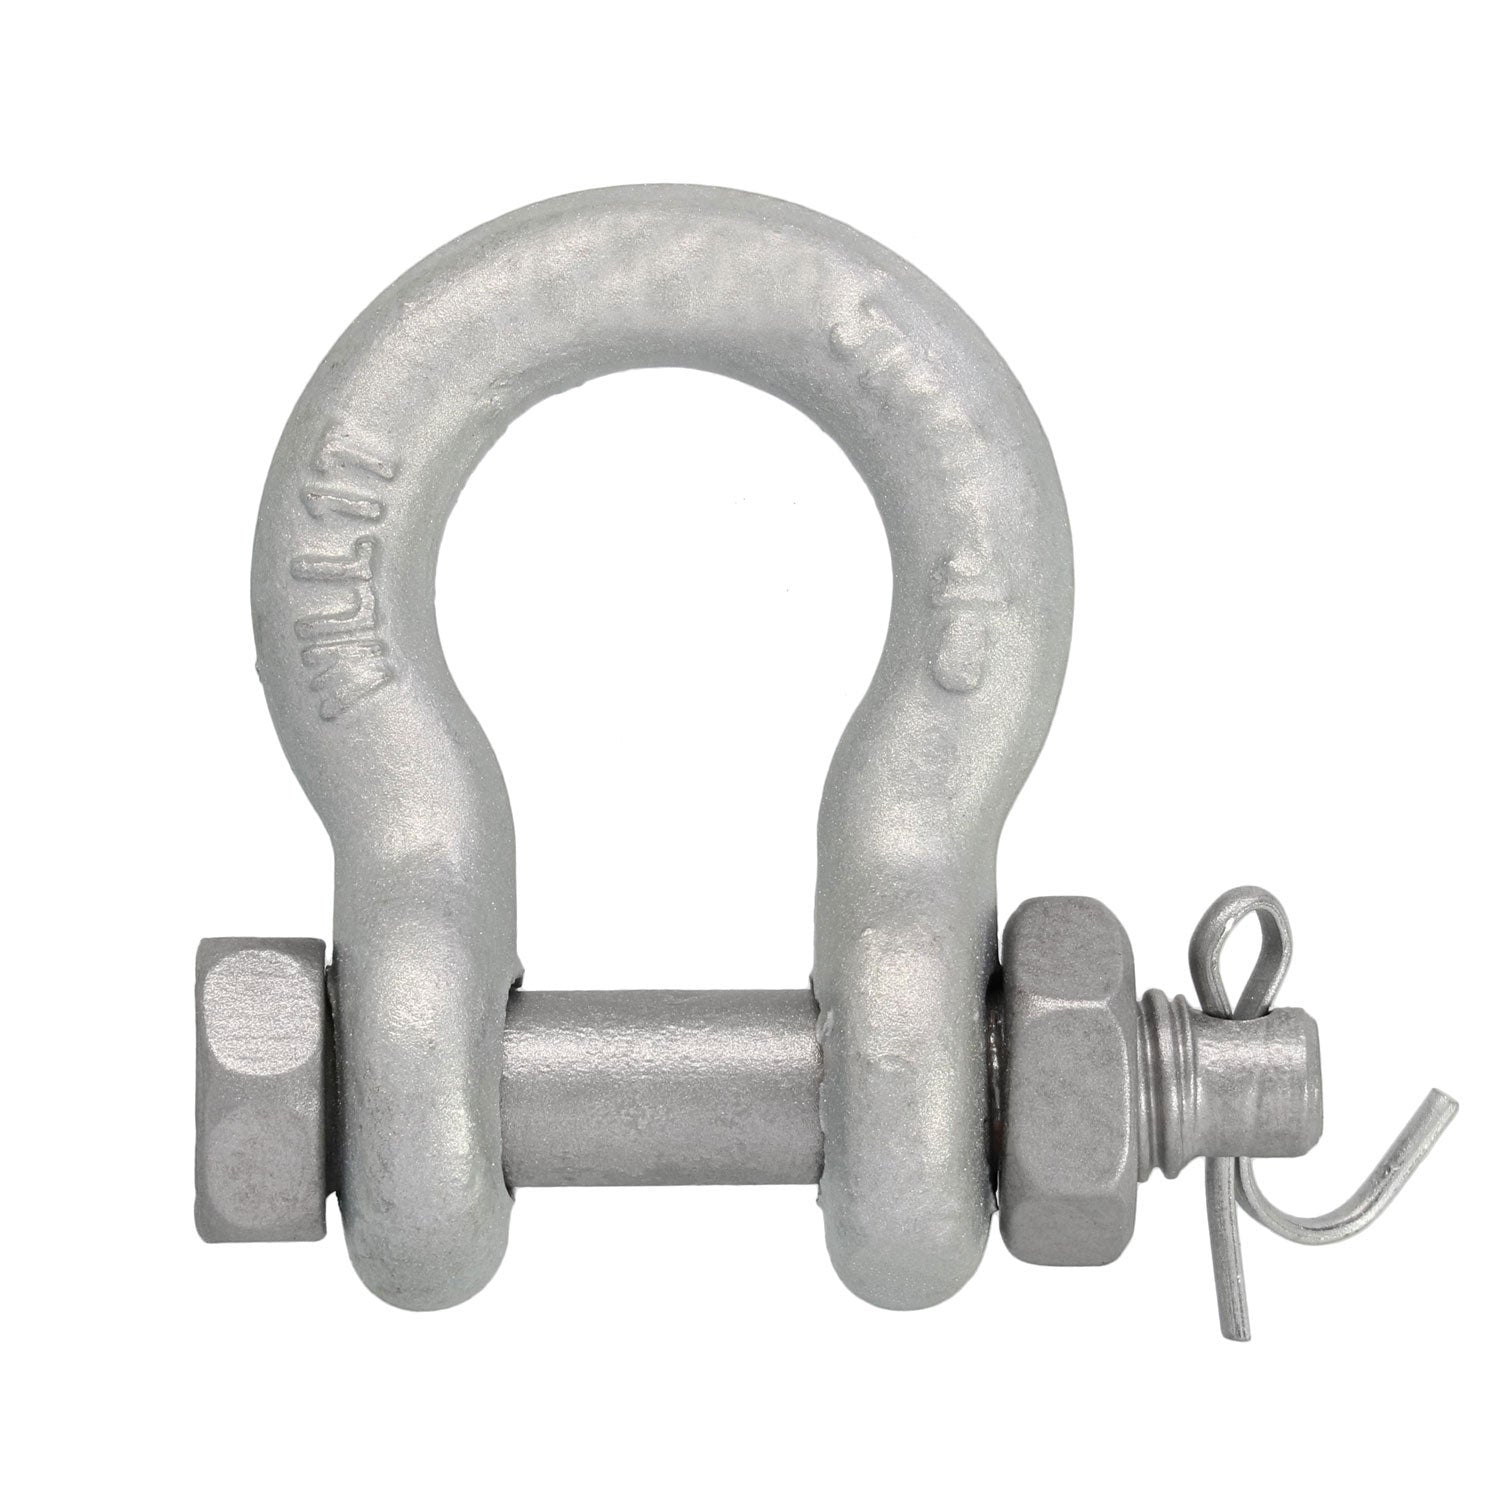 Galvanized Anchor Shackle 2000 lbs WLLIT Clevis Bow Lifting Crown Bolt 3/8 in 